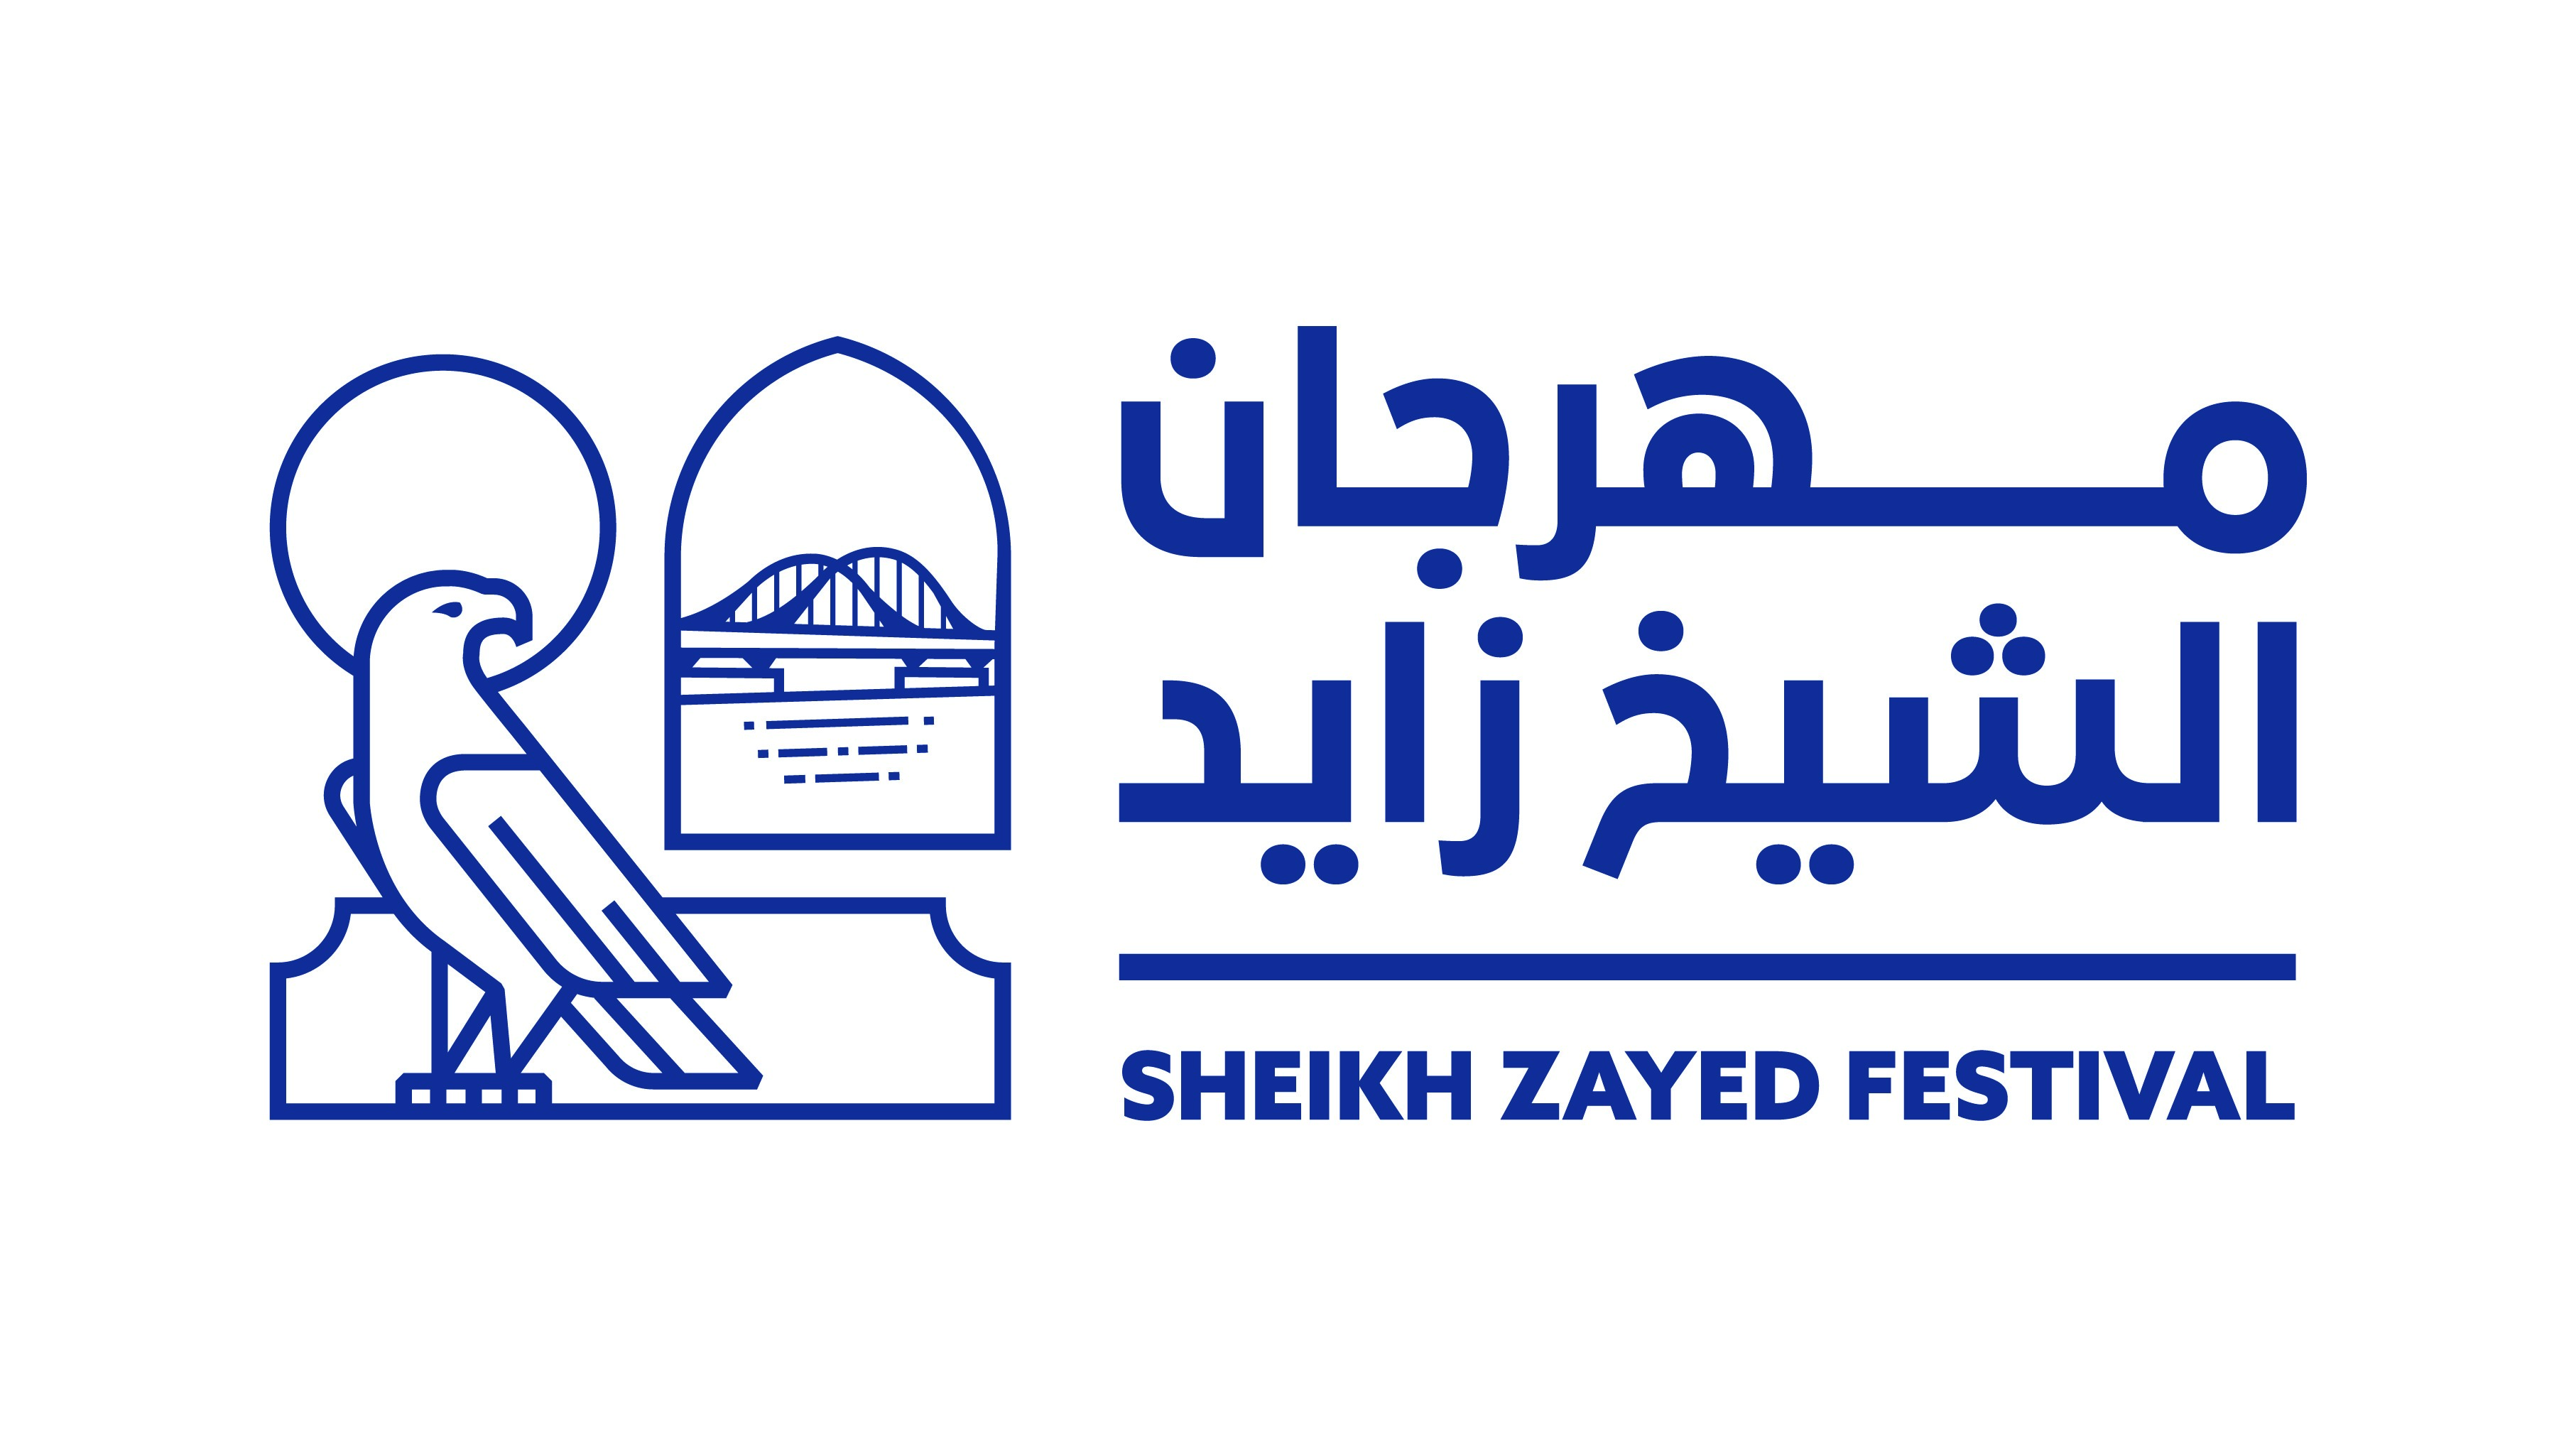 Sheikh Zayed Festival Opens Its Doors Today To World Of Exciting Events And Celebrations